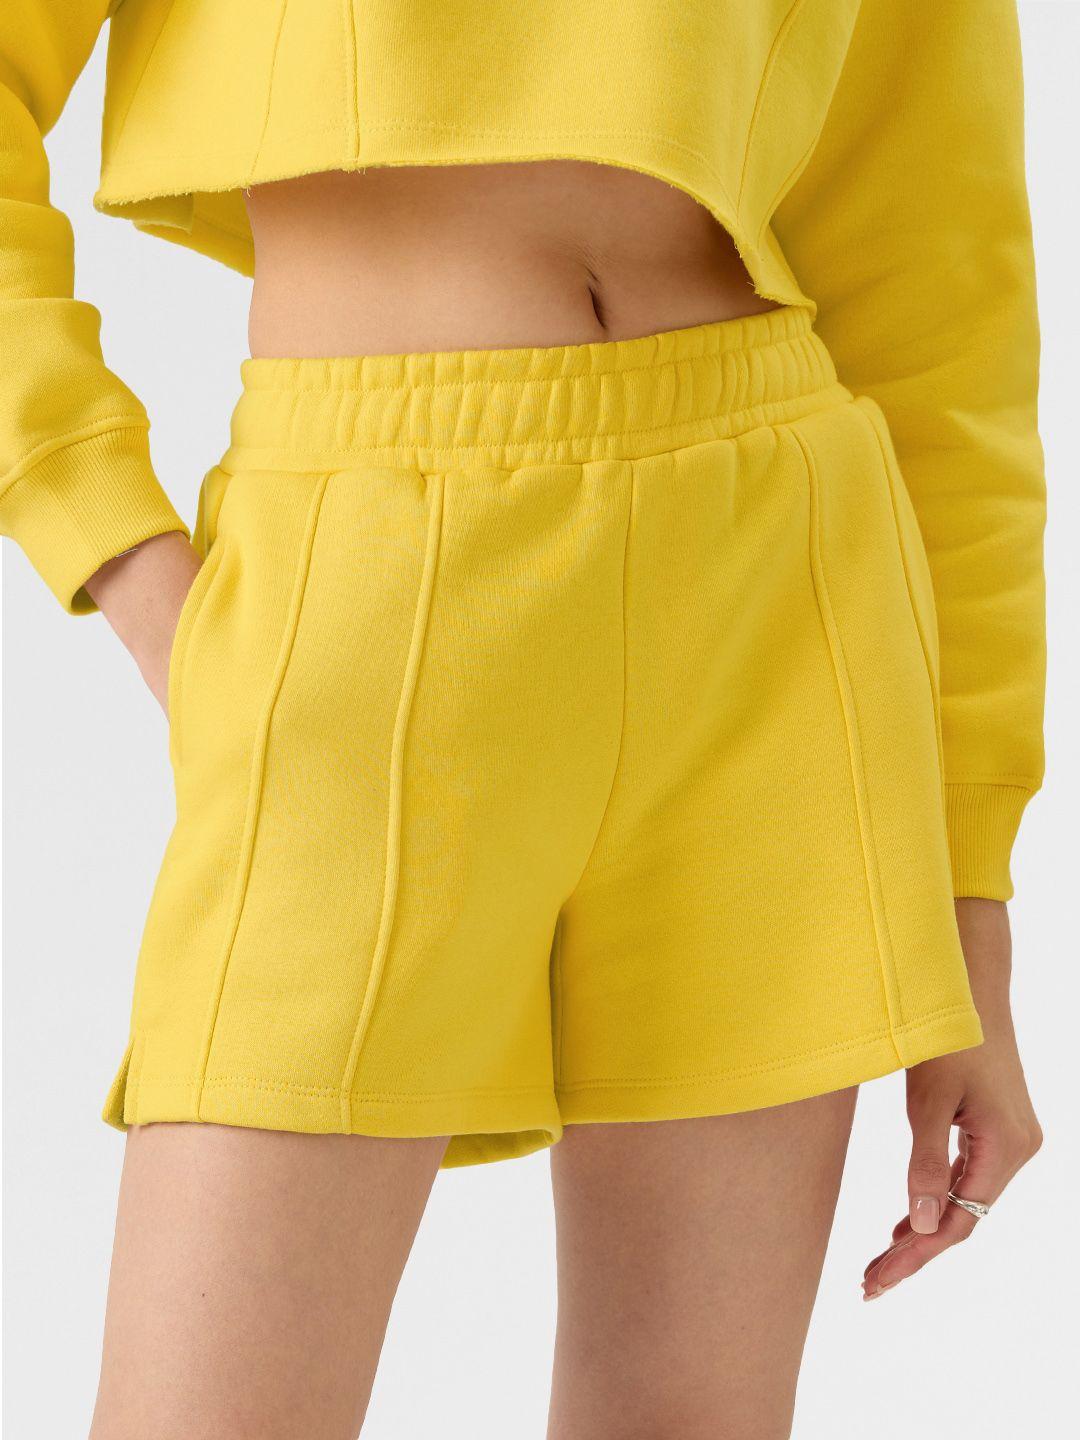 the souled store women mid-rise shorts